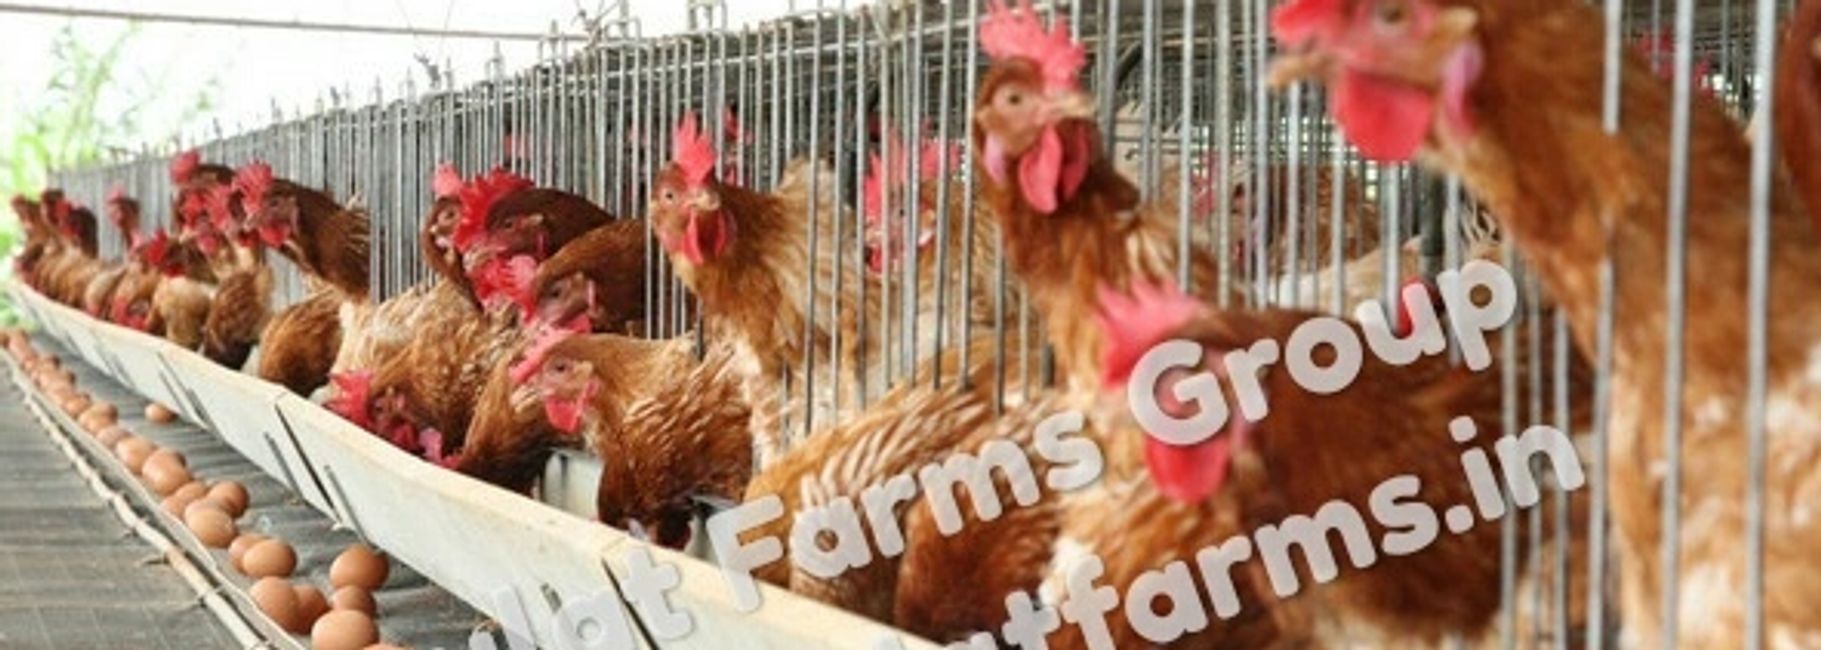 Poultry Contract Farming Daulat Farms Group Of Companies